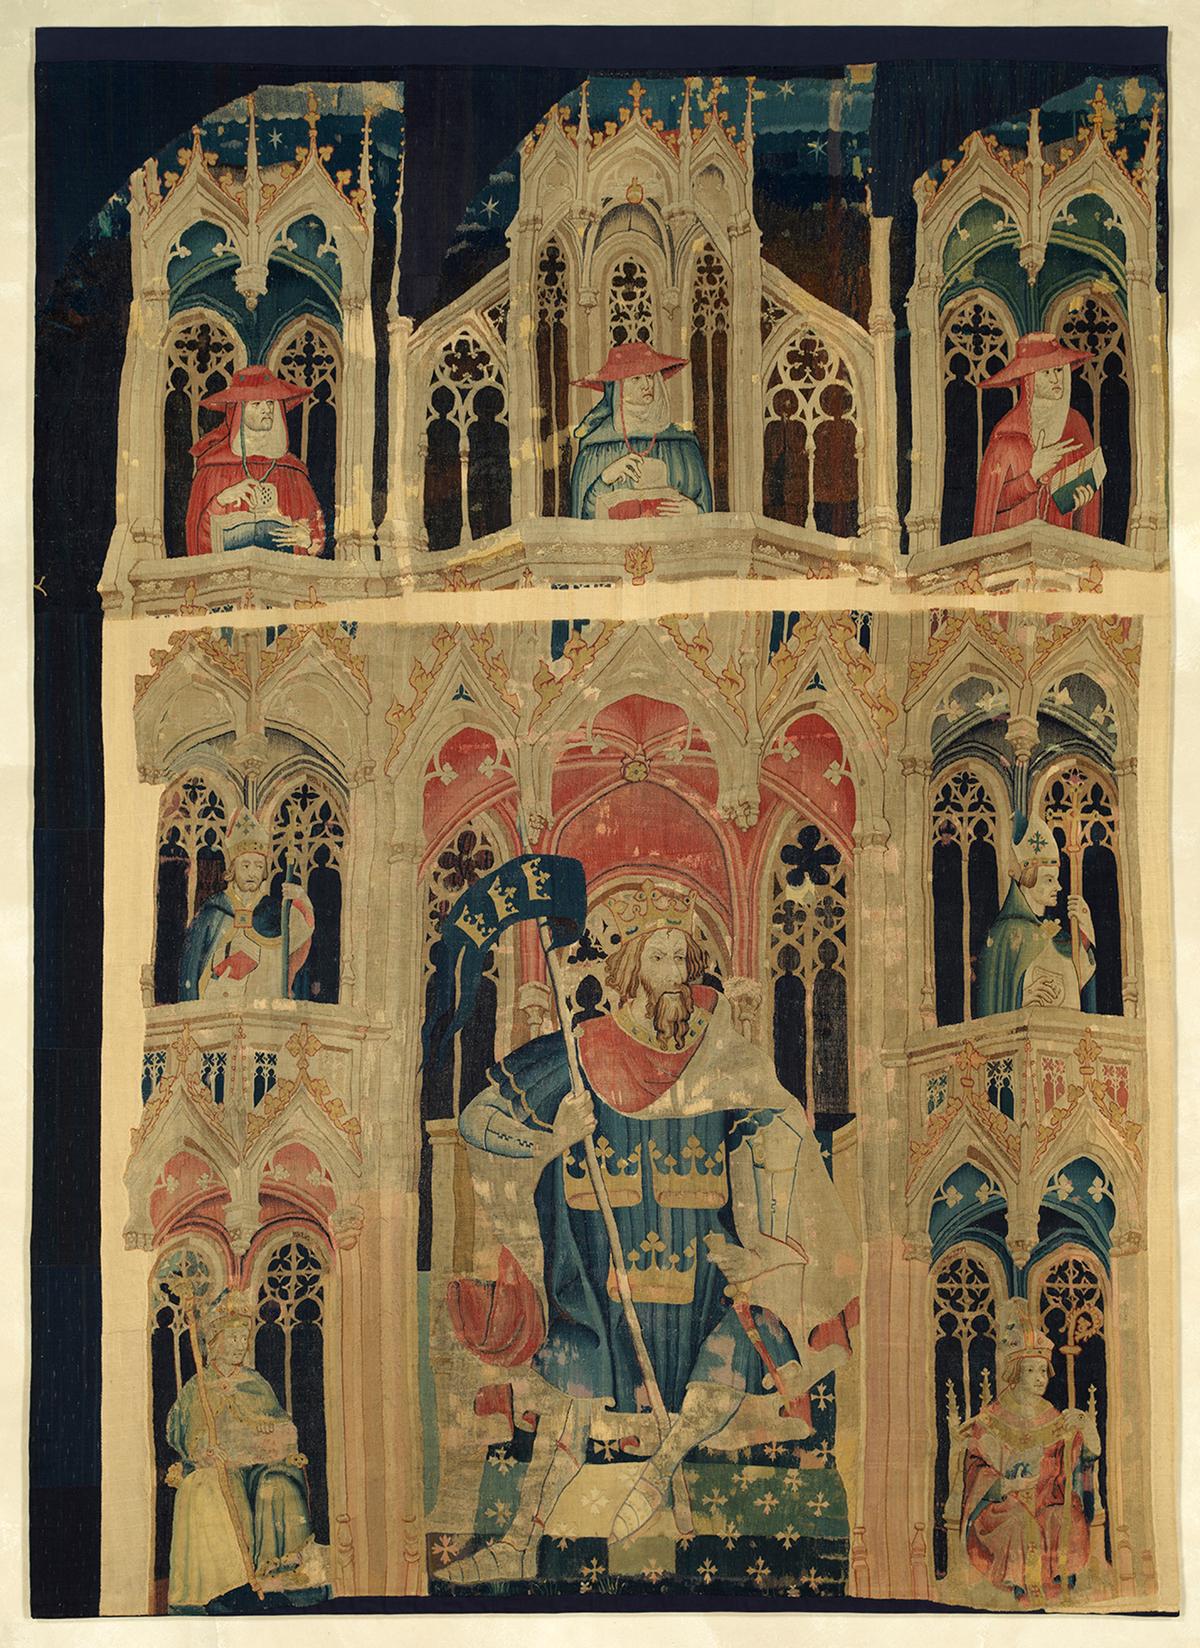  "King Arthur" (from the “Nine Heroes Tapestries”), circa 1400–1410, South Netherlandish. Wool warp, wool wefts; 168 inches by 117 inches. The Cloisters, The Metropolitan Museum of Art, New York City. (Public Domain)